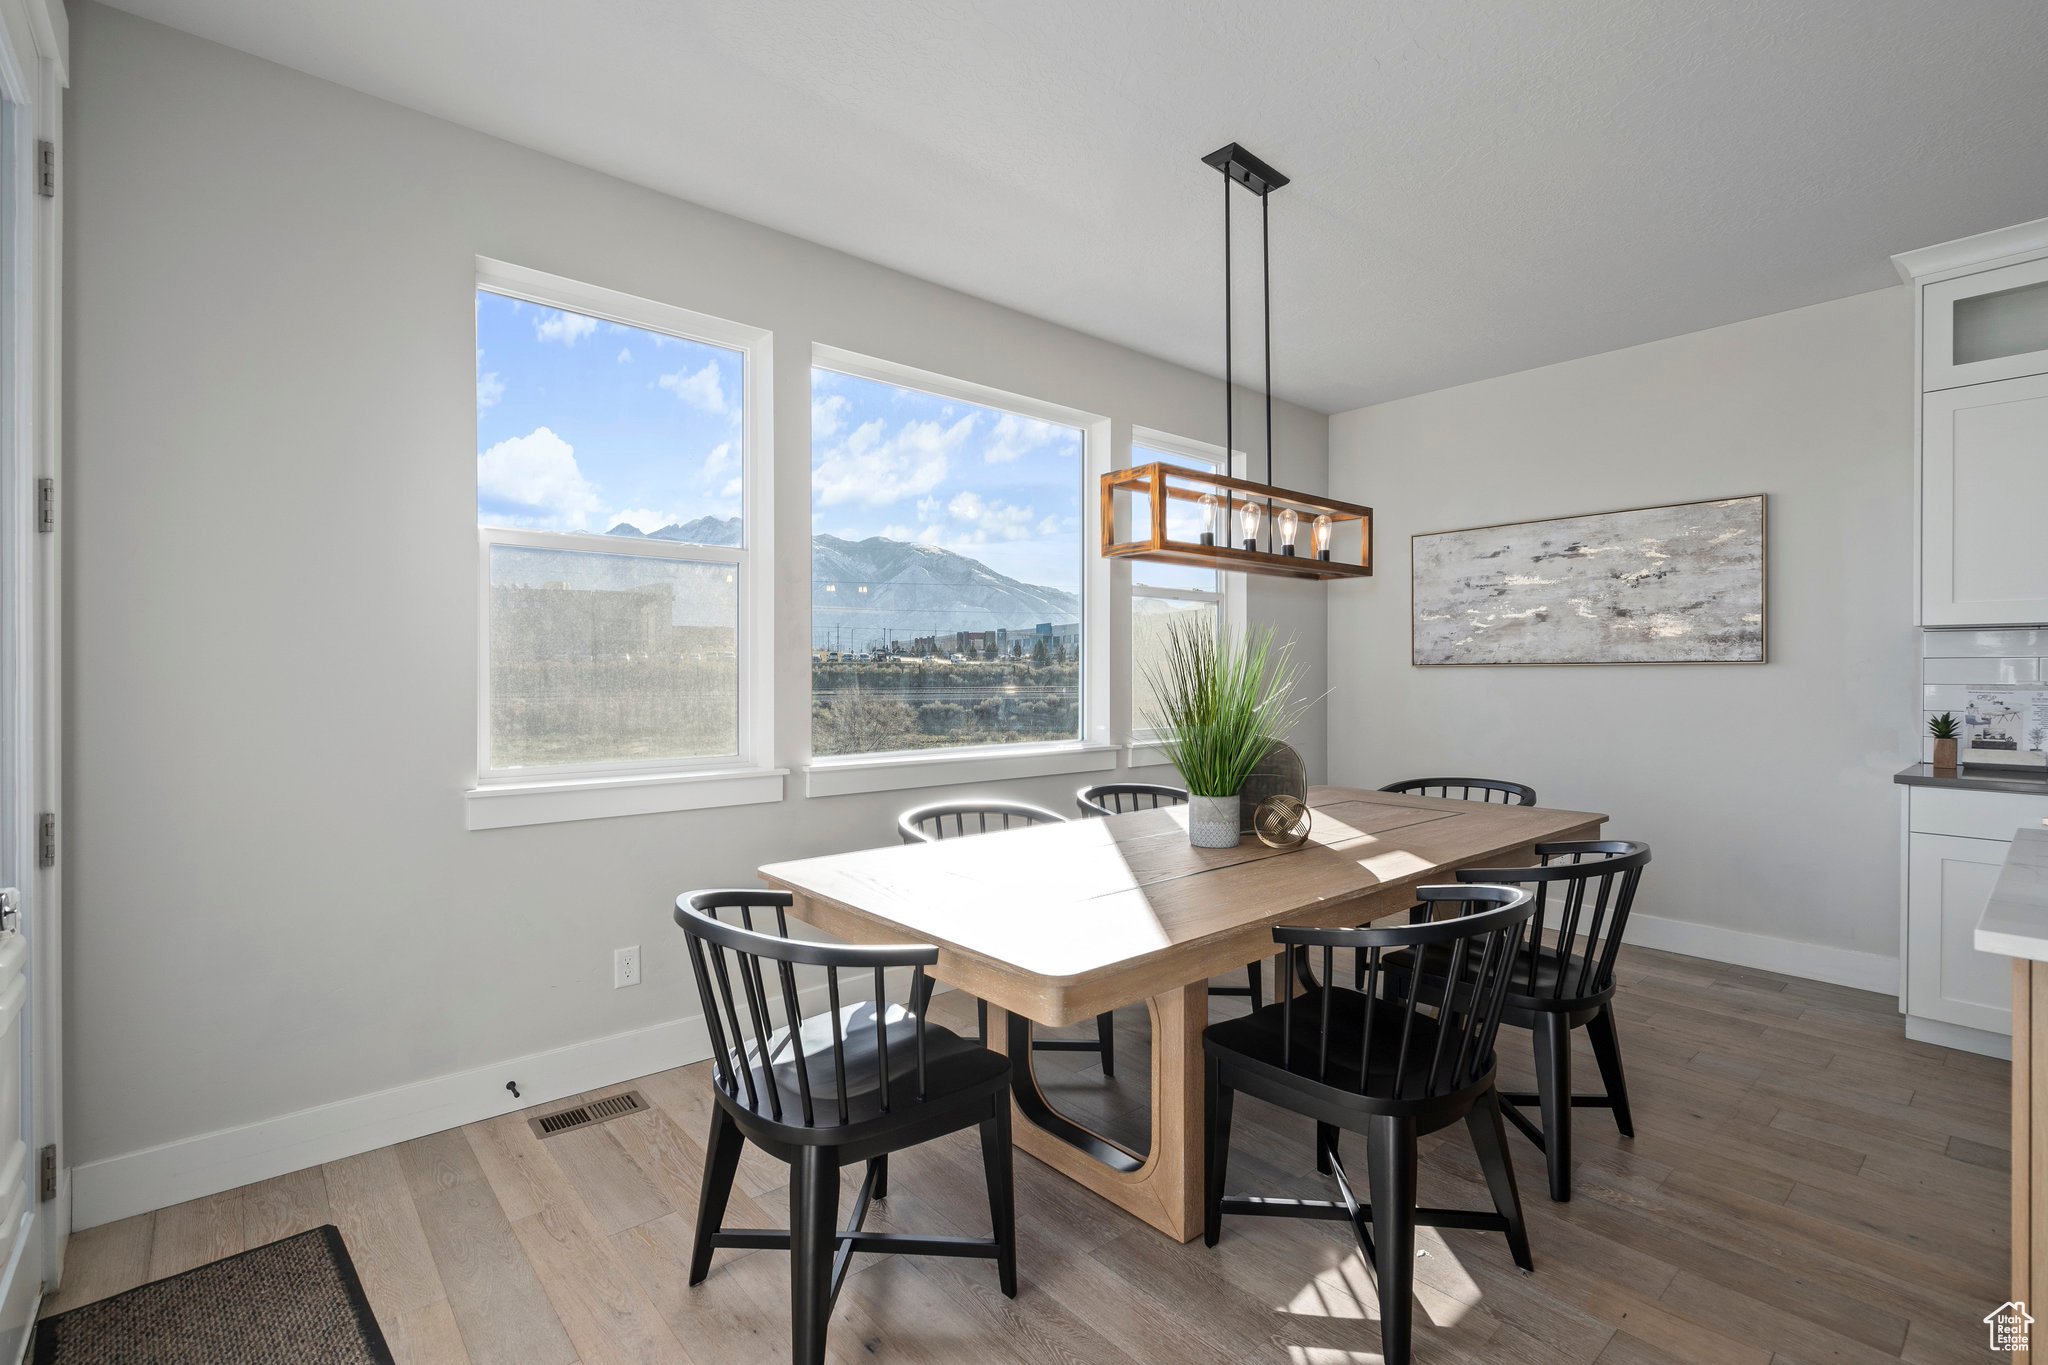 Dining space with a wealth of natural light, an inviting chandelier, light wood-type flooring, and a mountain view